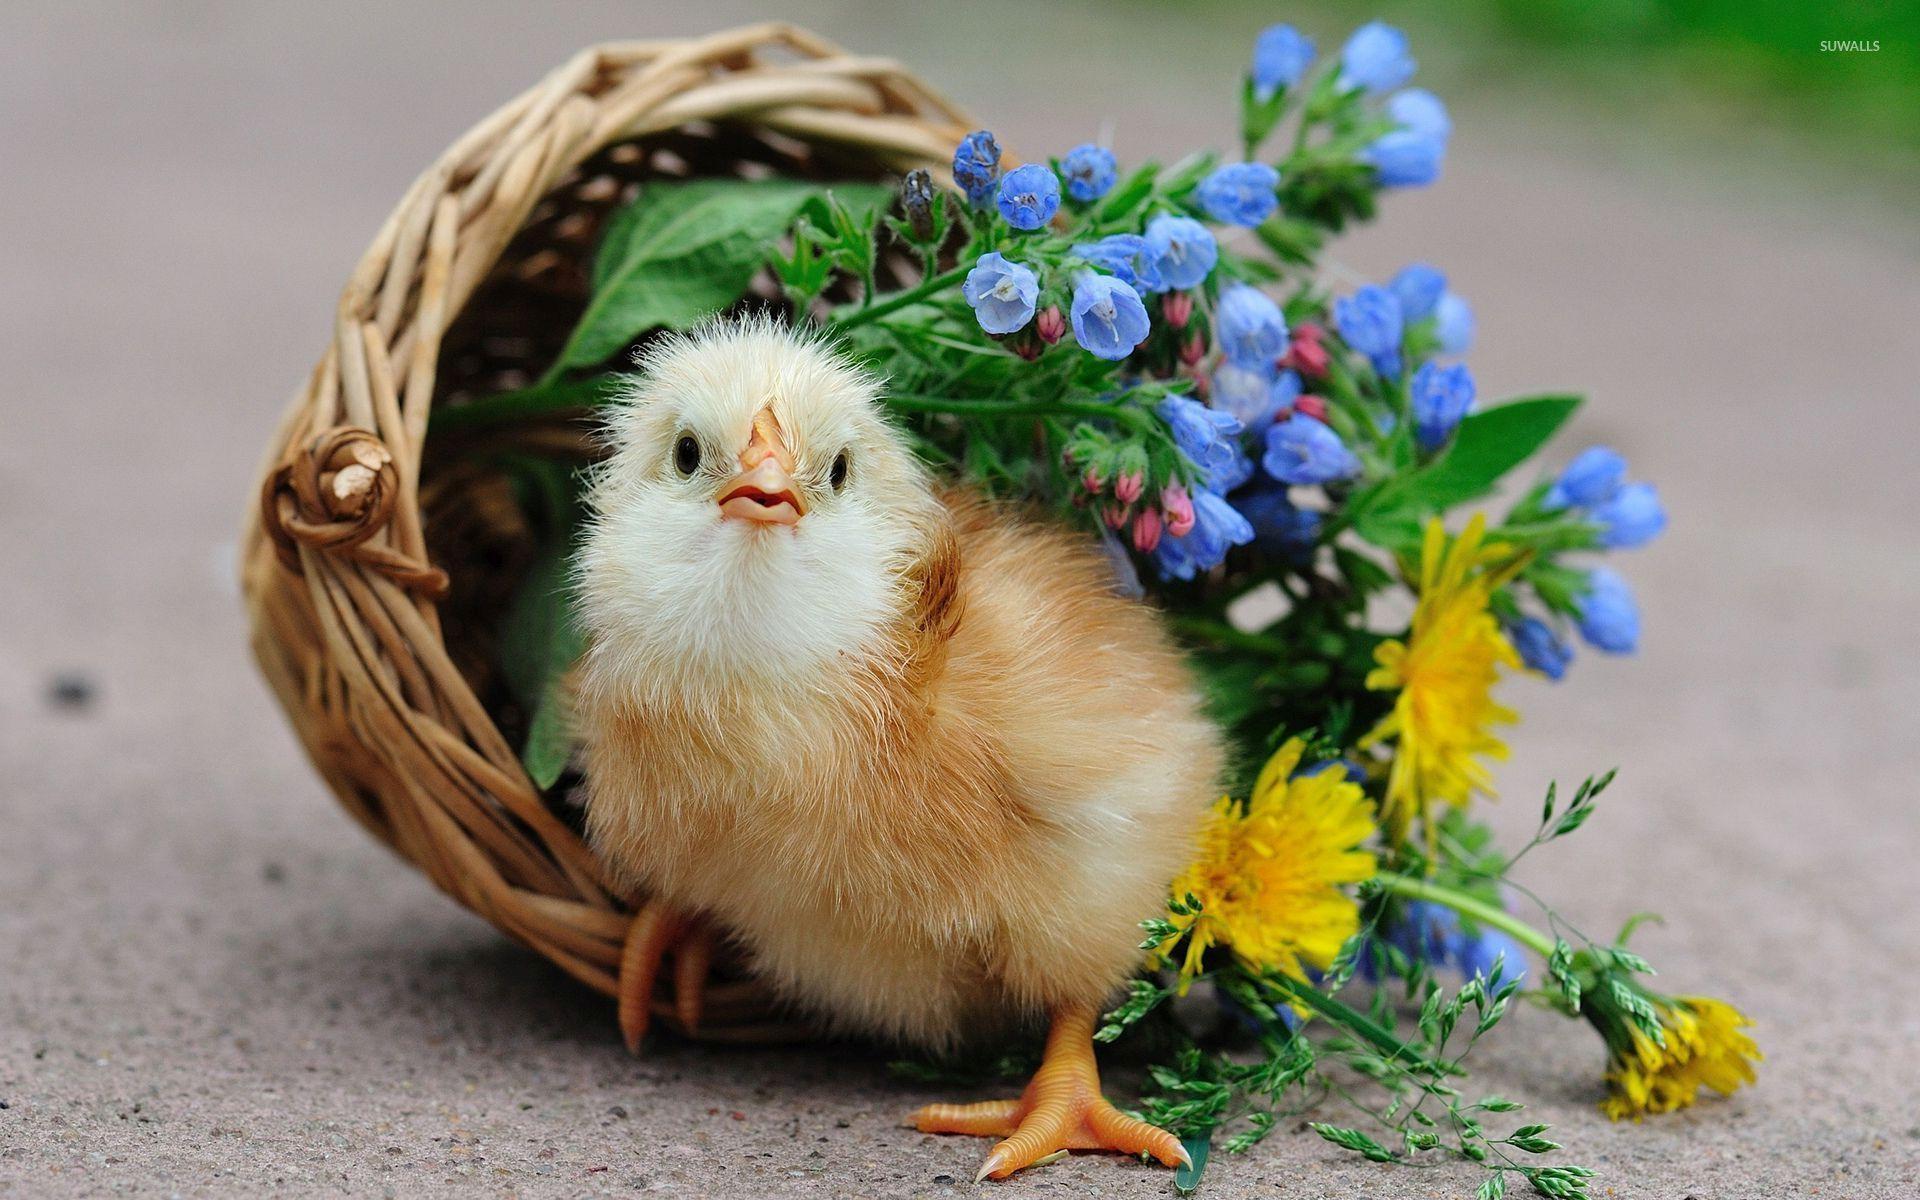 Chick 4K Ultra Hd Wallpapers, Chick, Animal